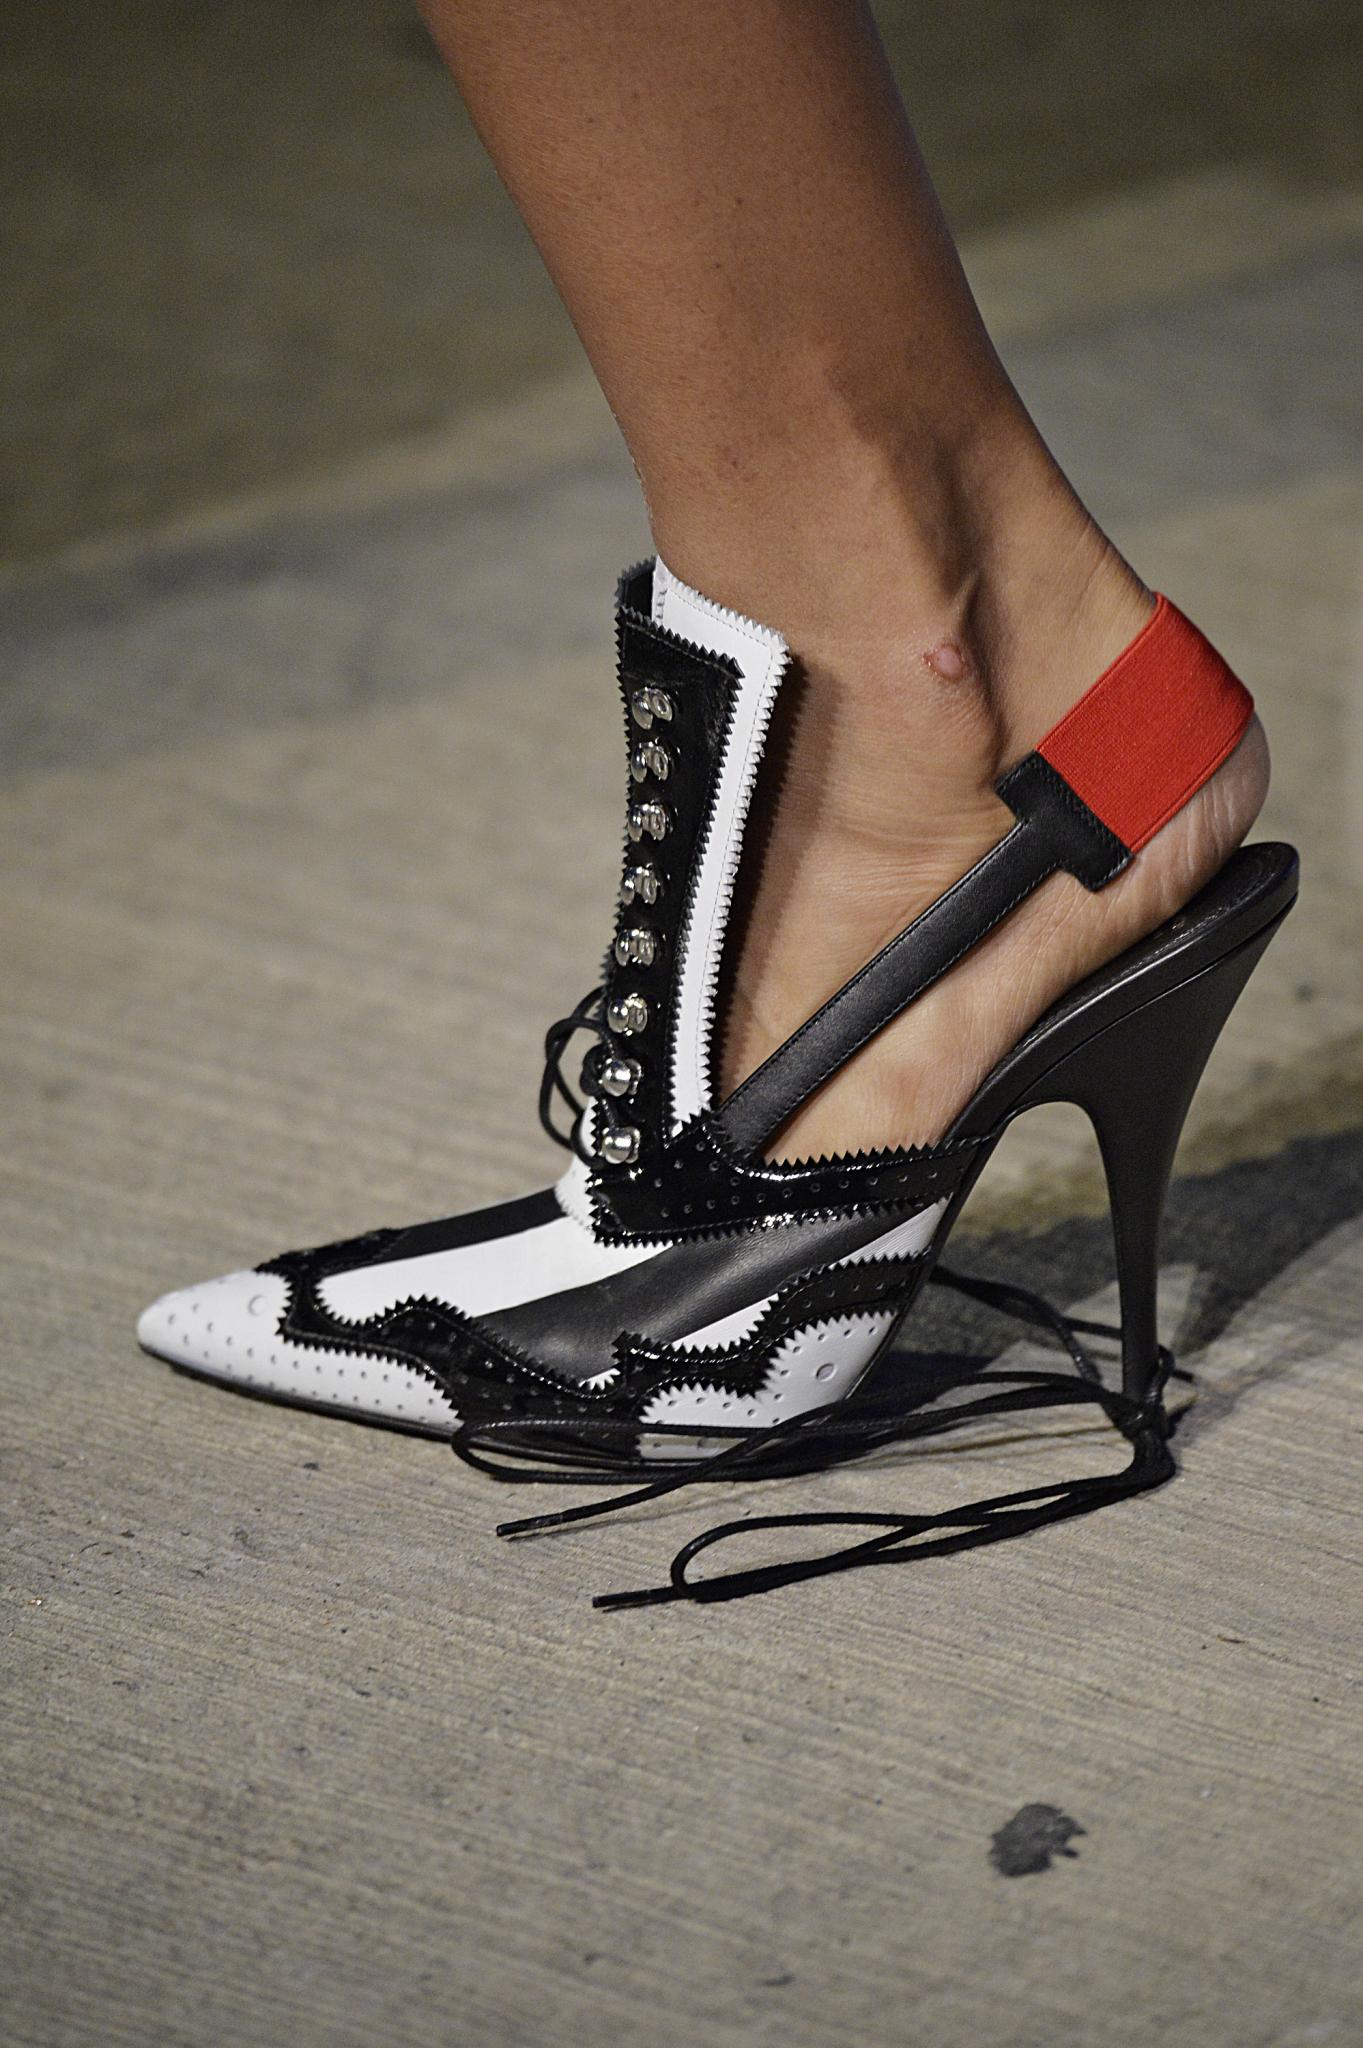 Started From The Bottom: The Ultimate Runway Shoes
